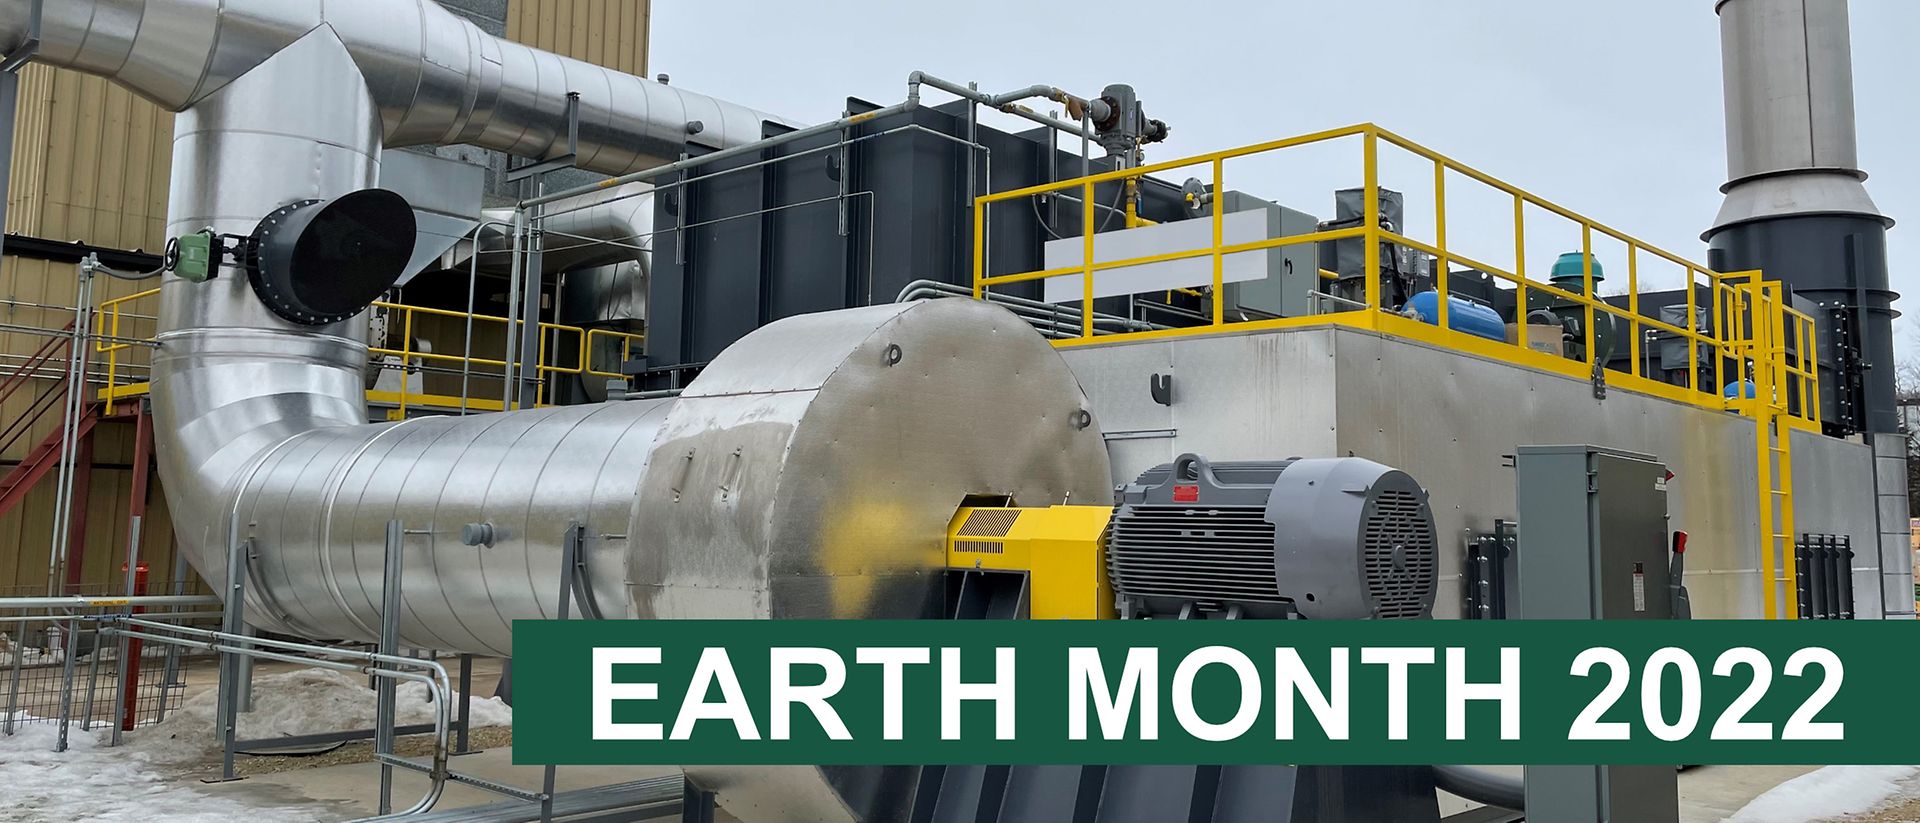 Machinery for reducing emissions outside building with 'Earth month 2022' text on a green bar